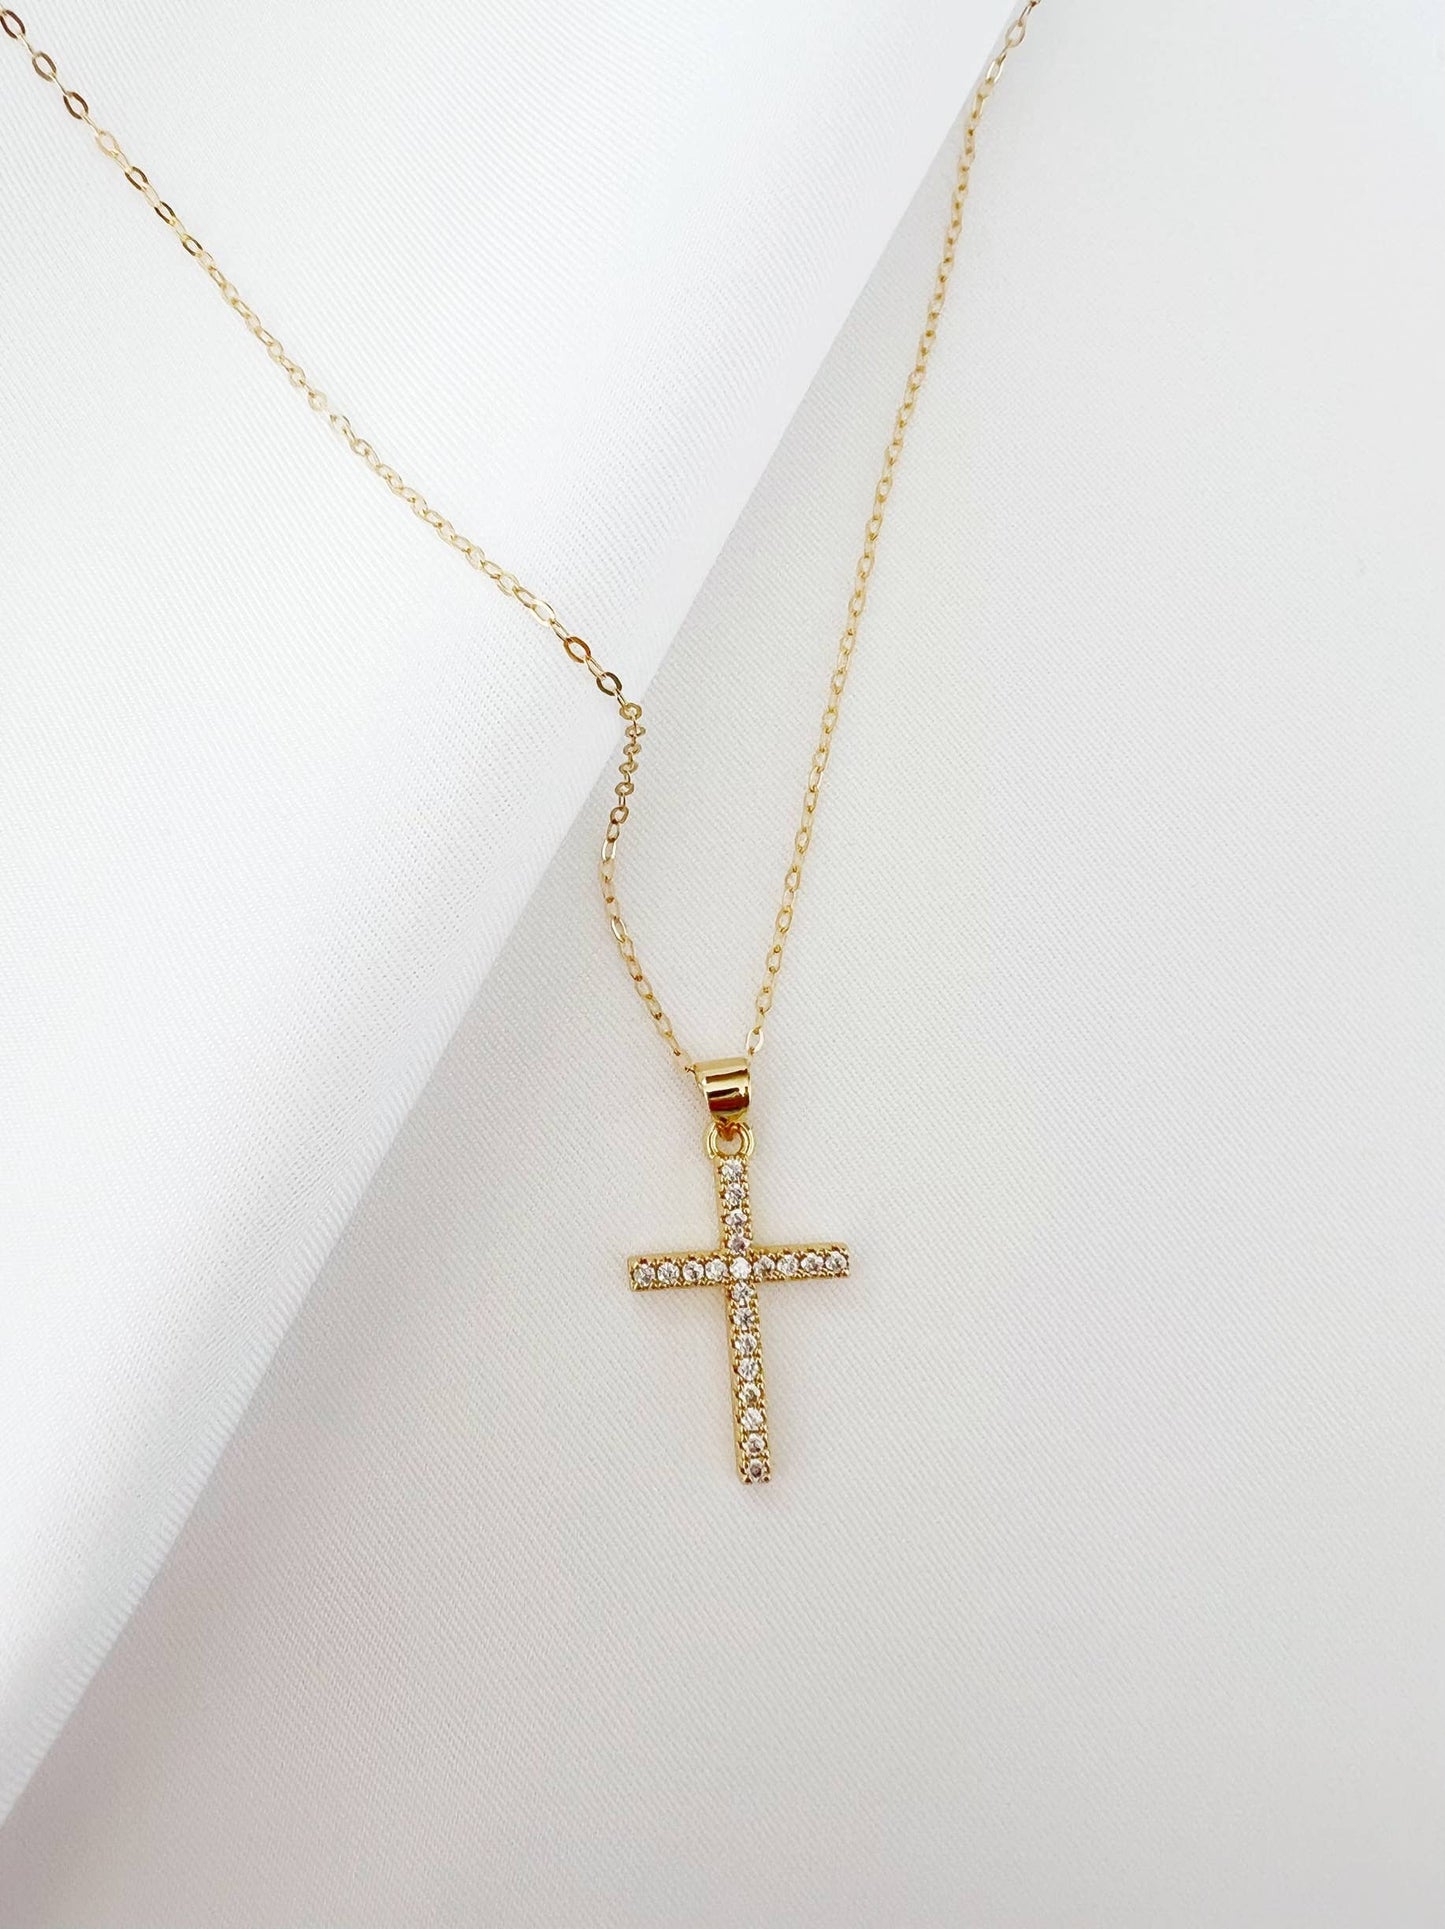 Cross Religious Cz Necklace Gold Filled